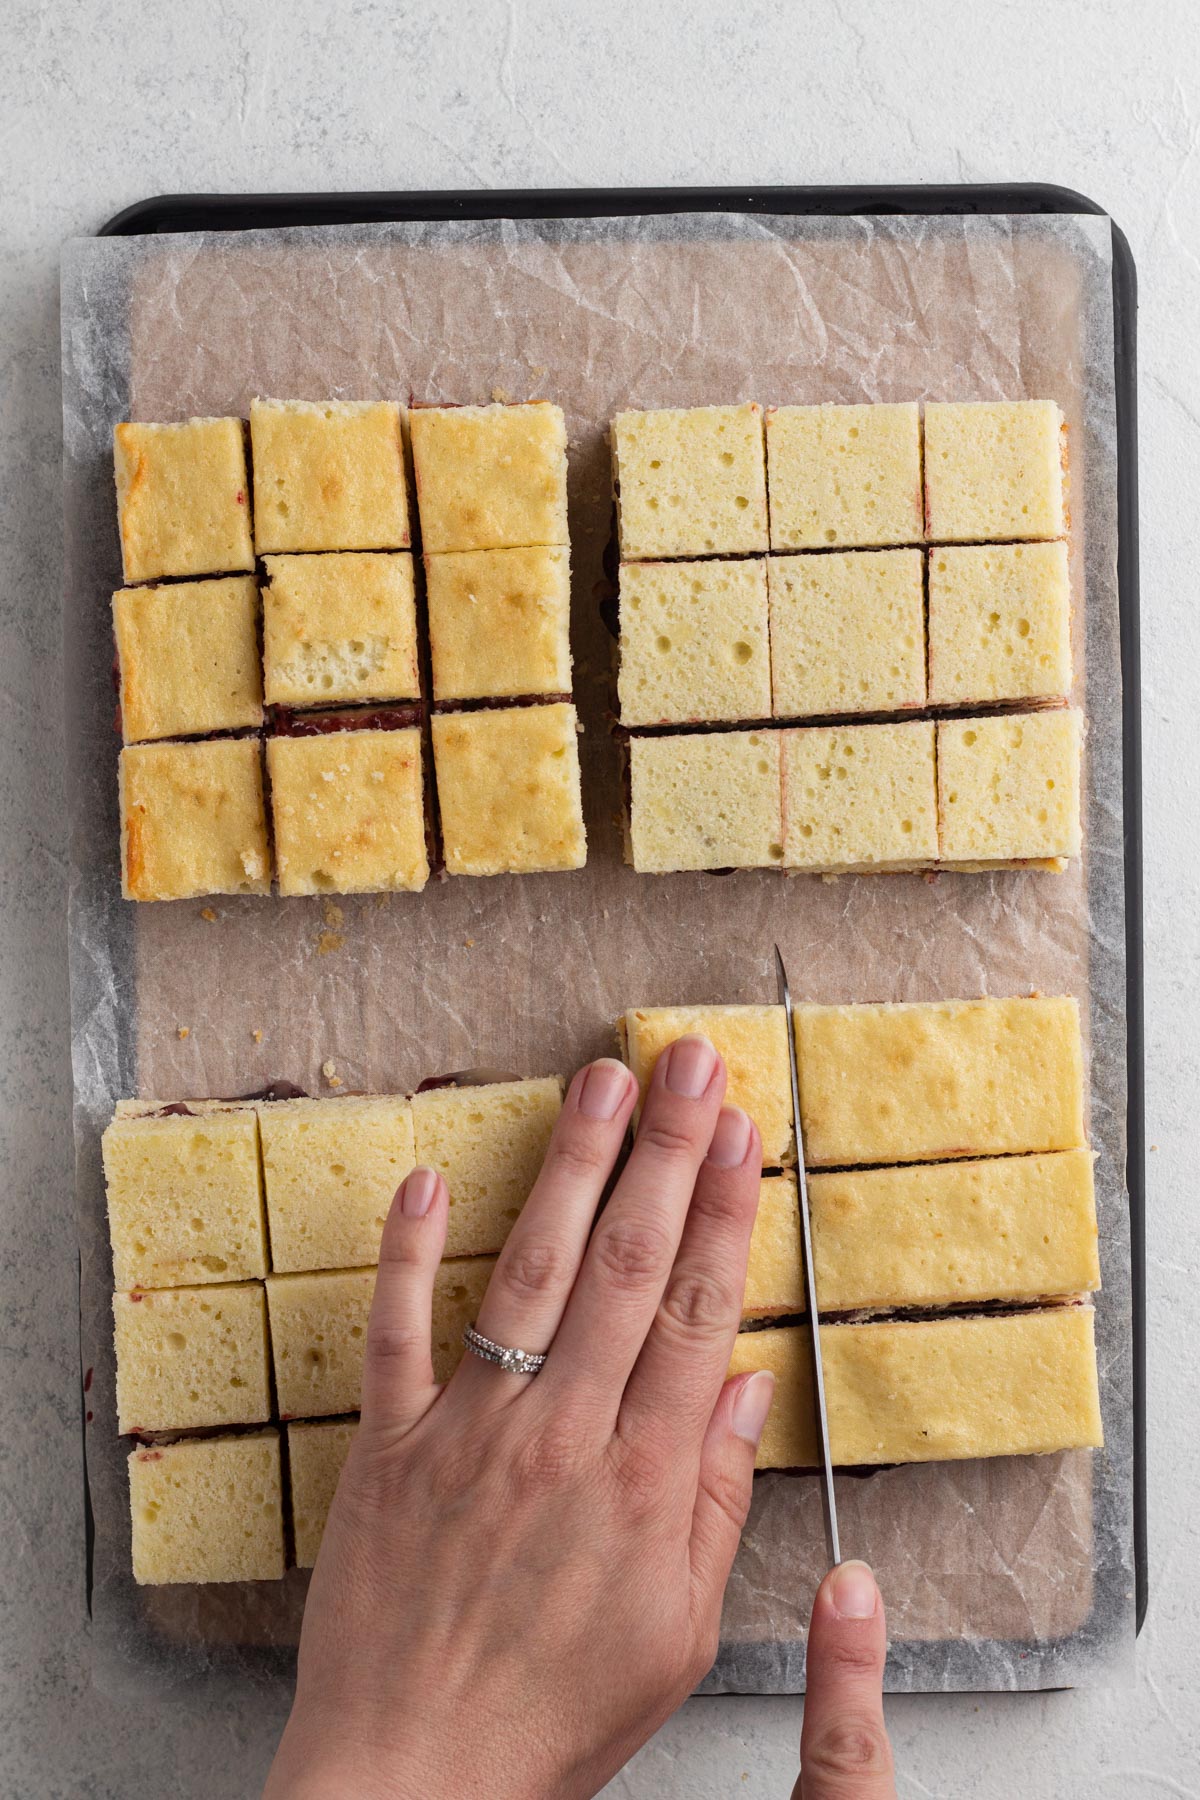 Hands cutting stacked cake squares into smaller tea cakes.